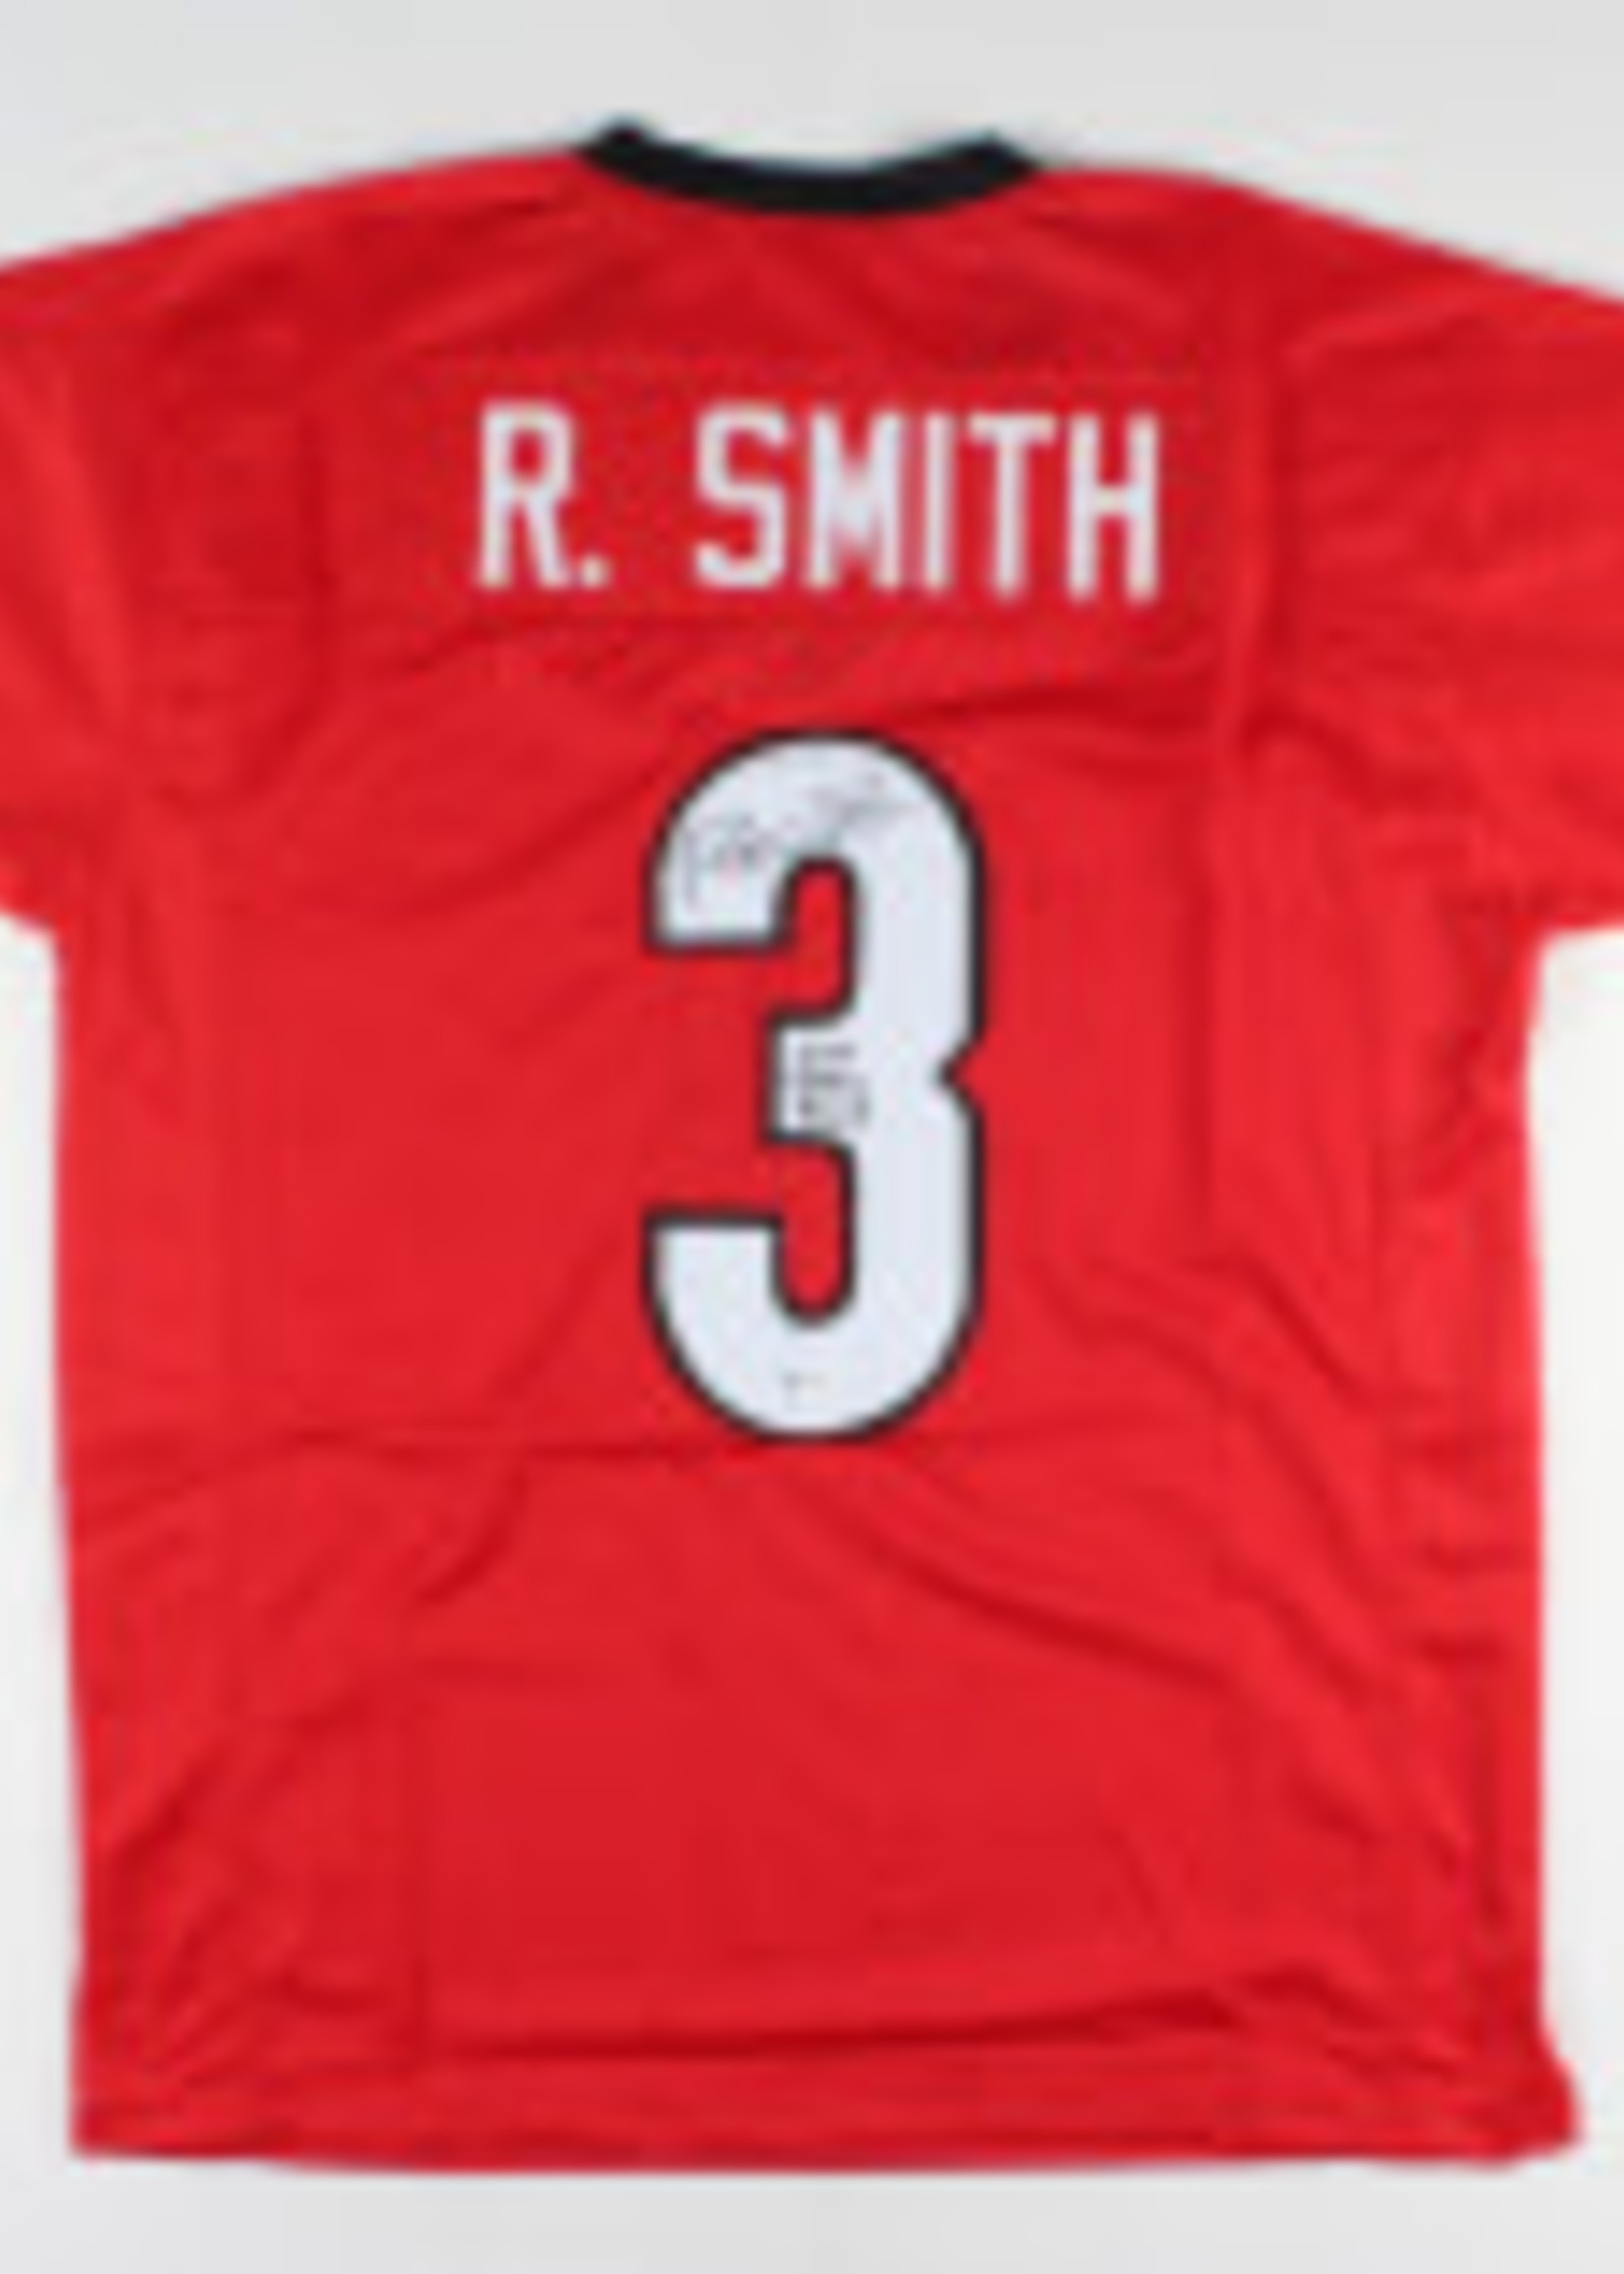 Roquan Smith Jersey